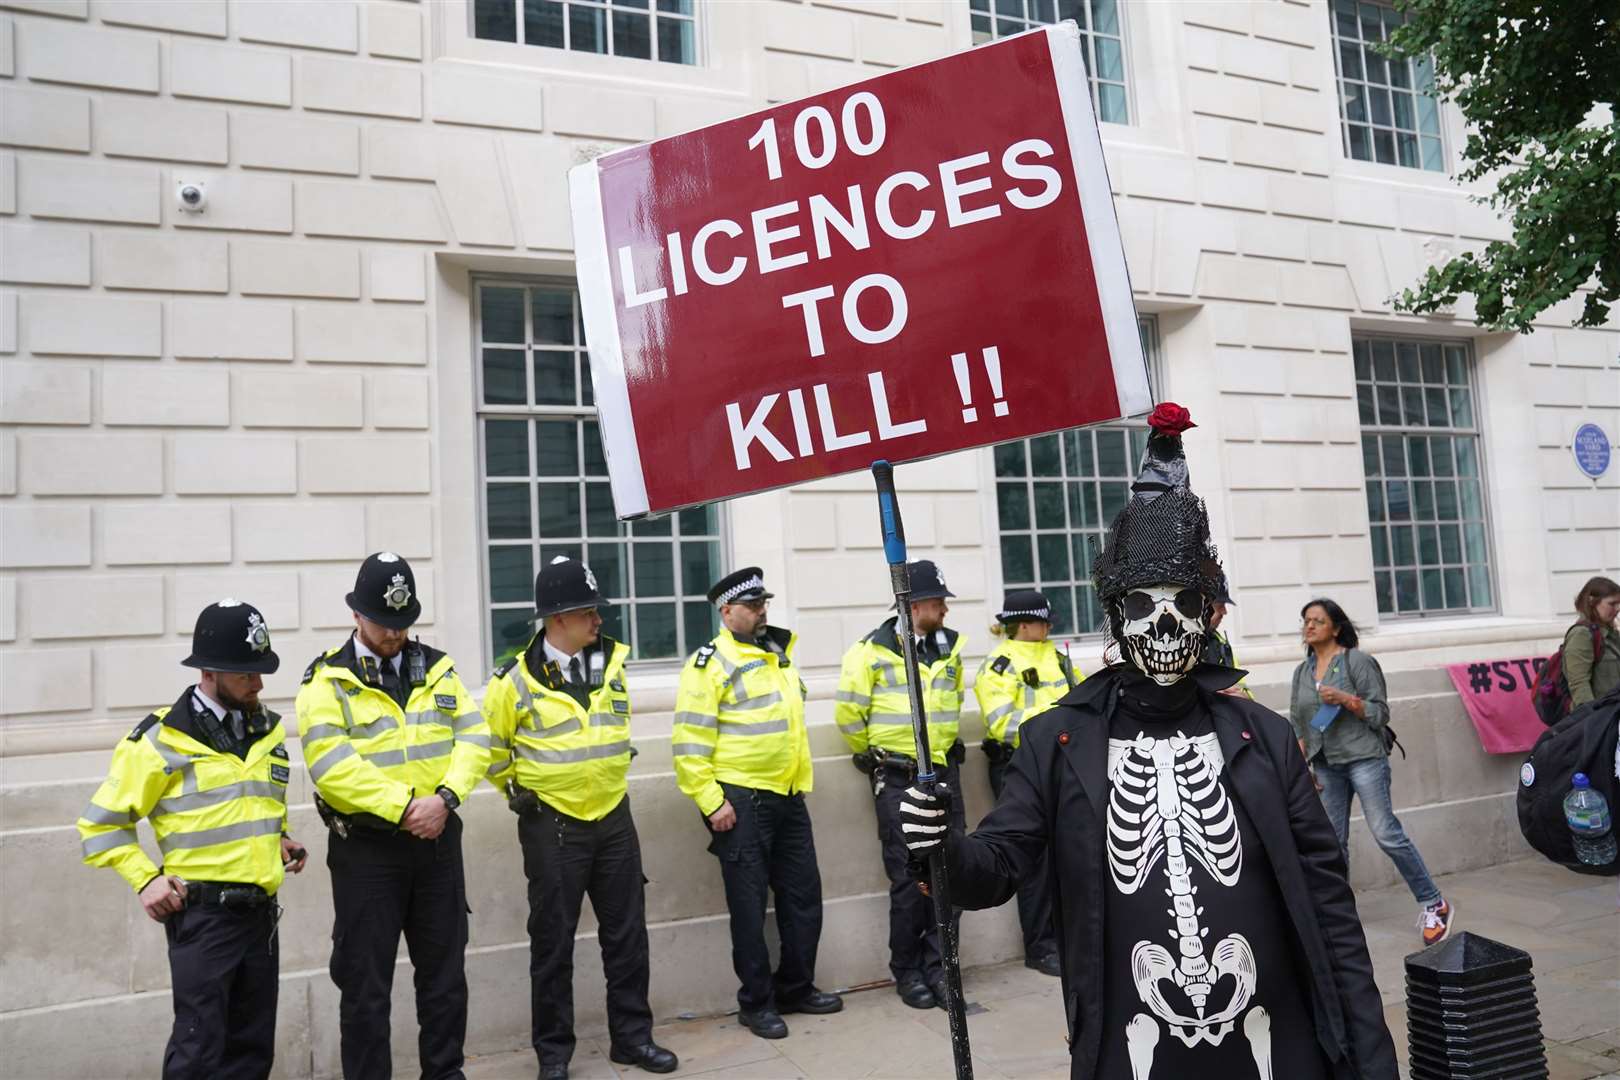 One protester in central London was dressed as a skeleton (Lucy North/PA)